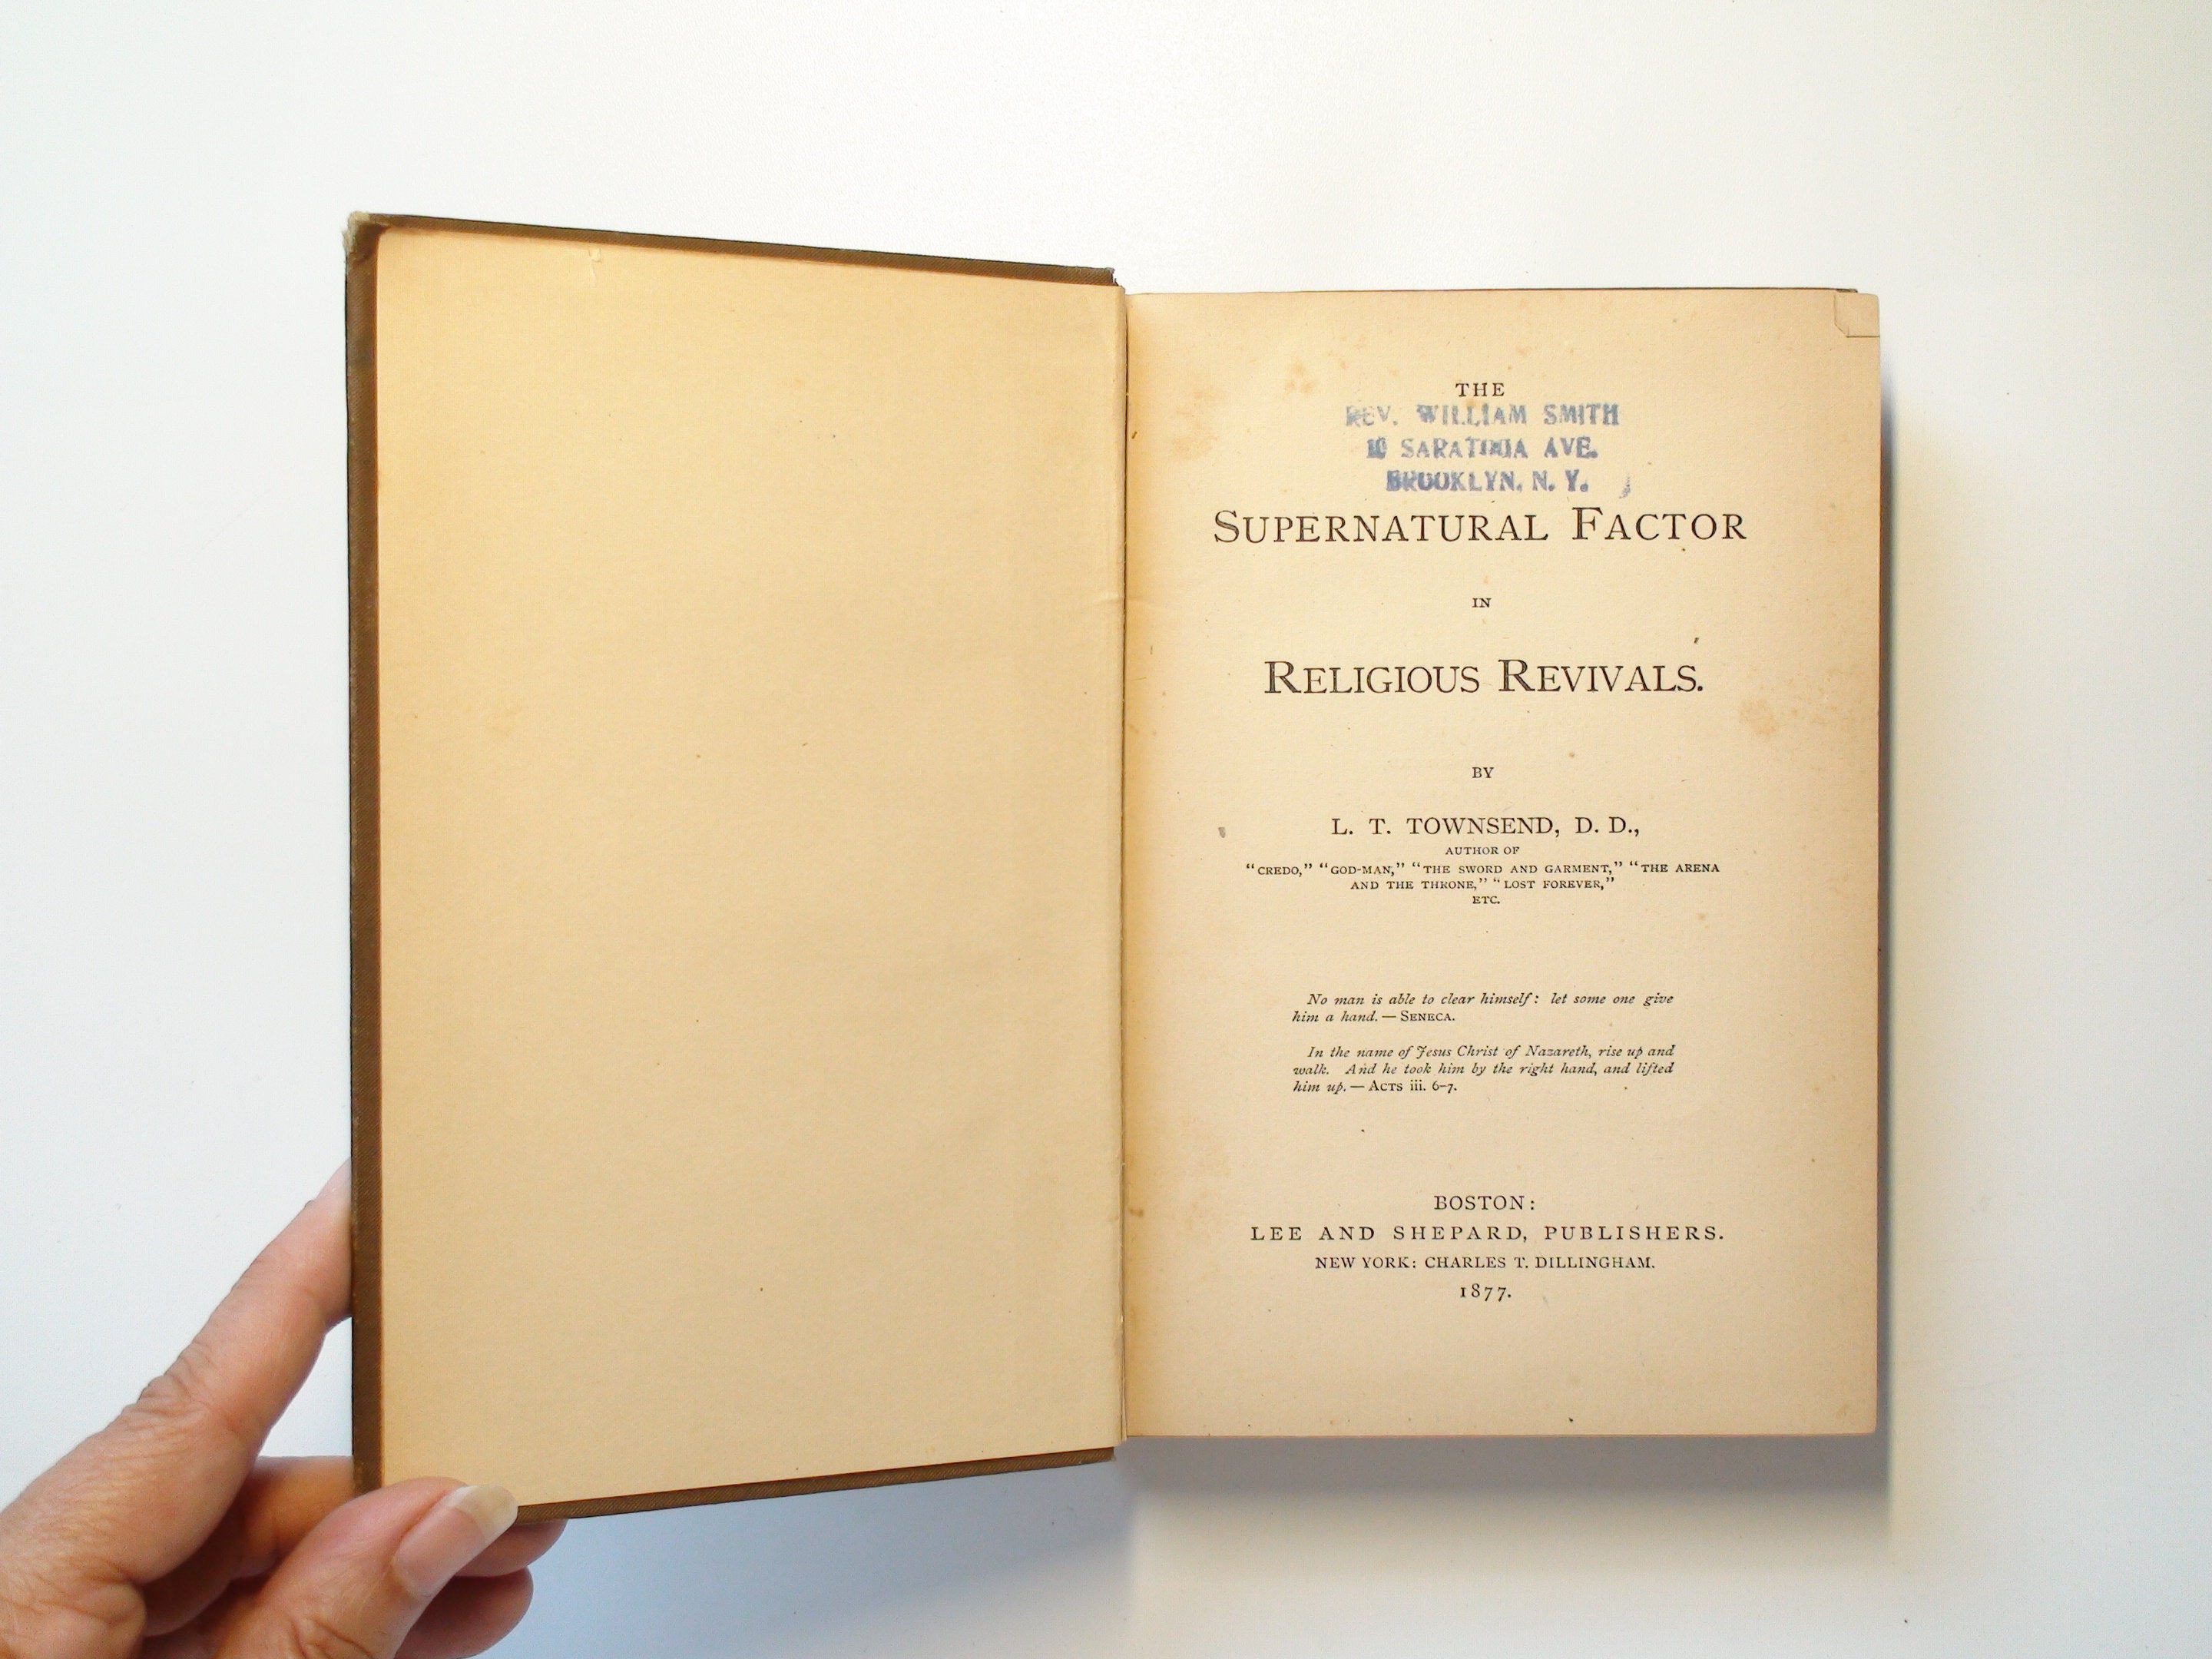 Supernatural Factor in Religious Revivals by L. T. Townsend, 1st Ed, 1877